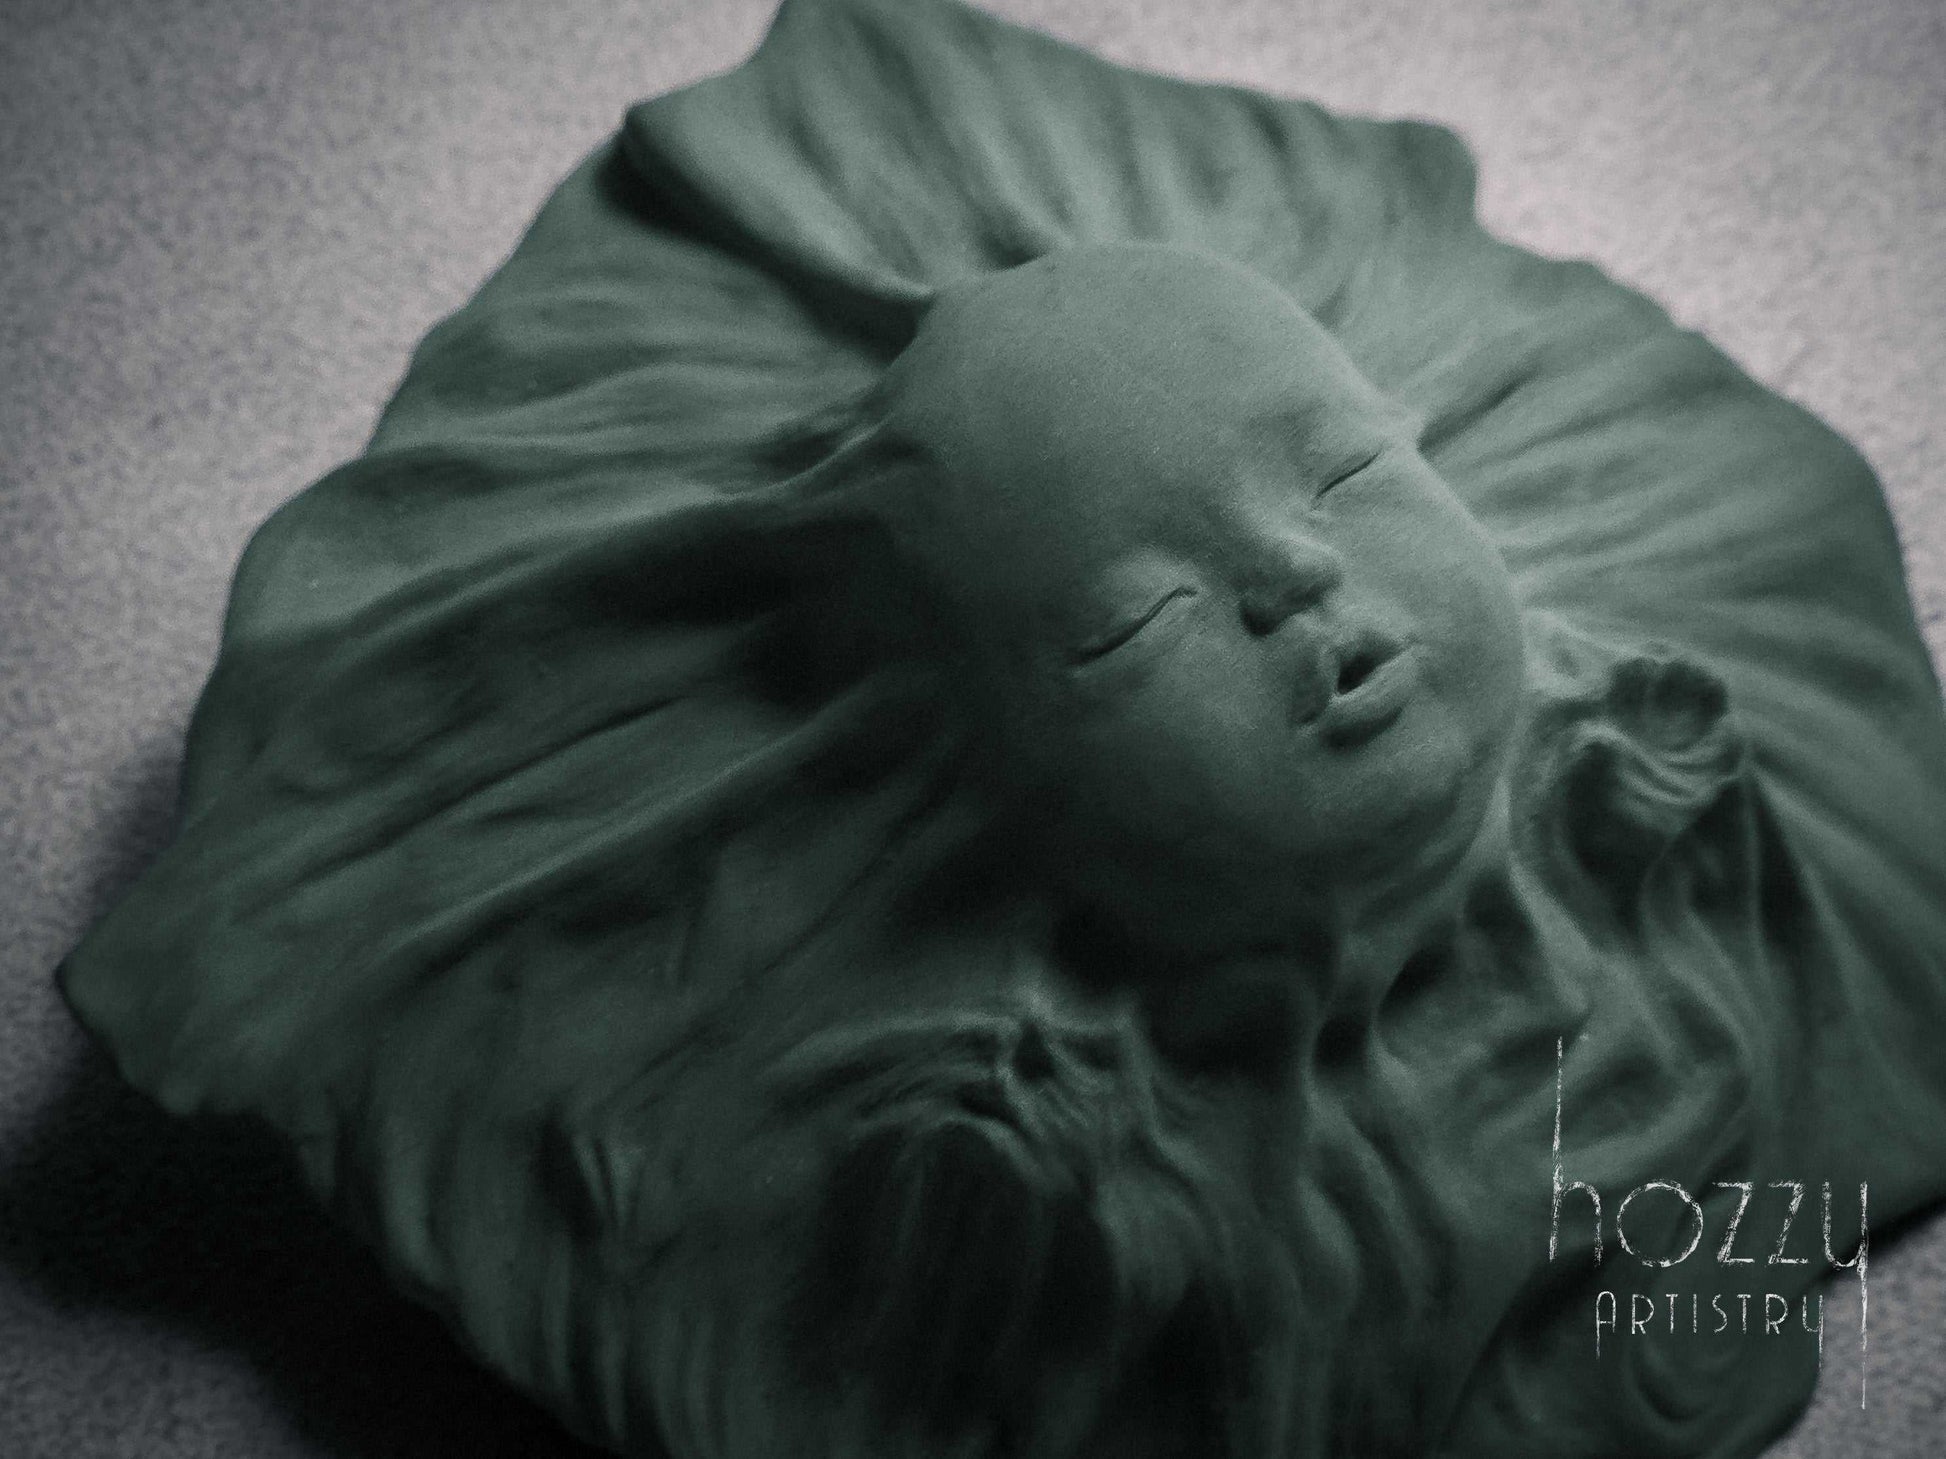 The Veiled BabyThe design takes inspiration from the timeless marble sculpture "The Veiled Virgin" by Italian artist Giovanni Strazza. The sculpture portrays a baby's face with a tHOZZY Artistry StoreHOZZY Artistry Store